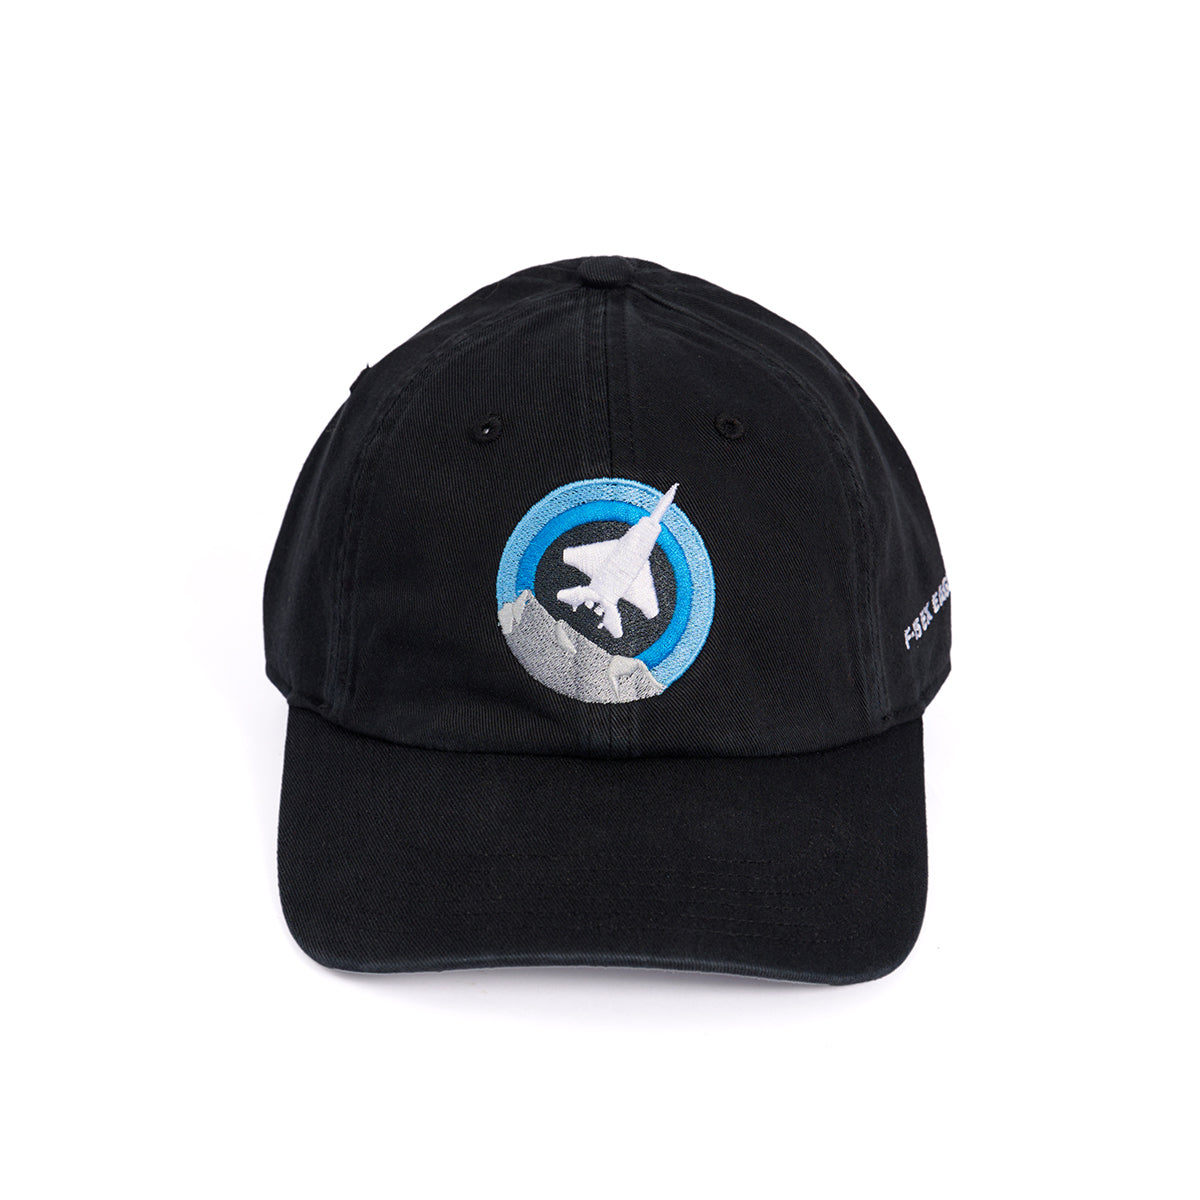 Skyward hat, featuring the iconic Boeing F-15EX Eagle embroidered in a roundel design on the front.